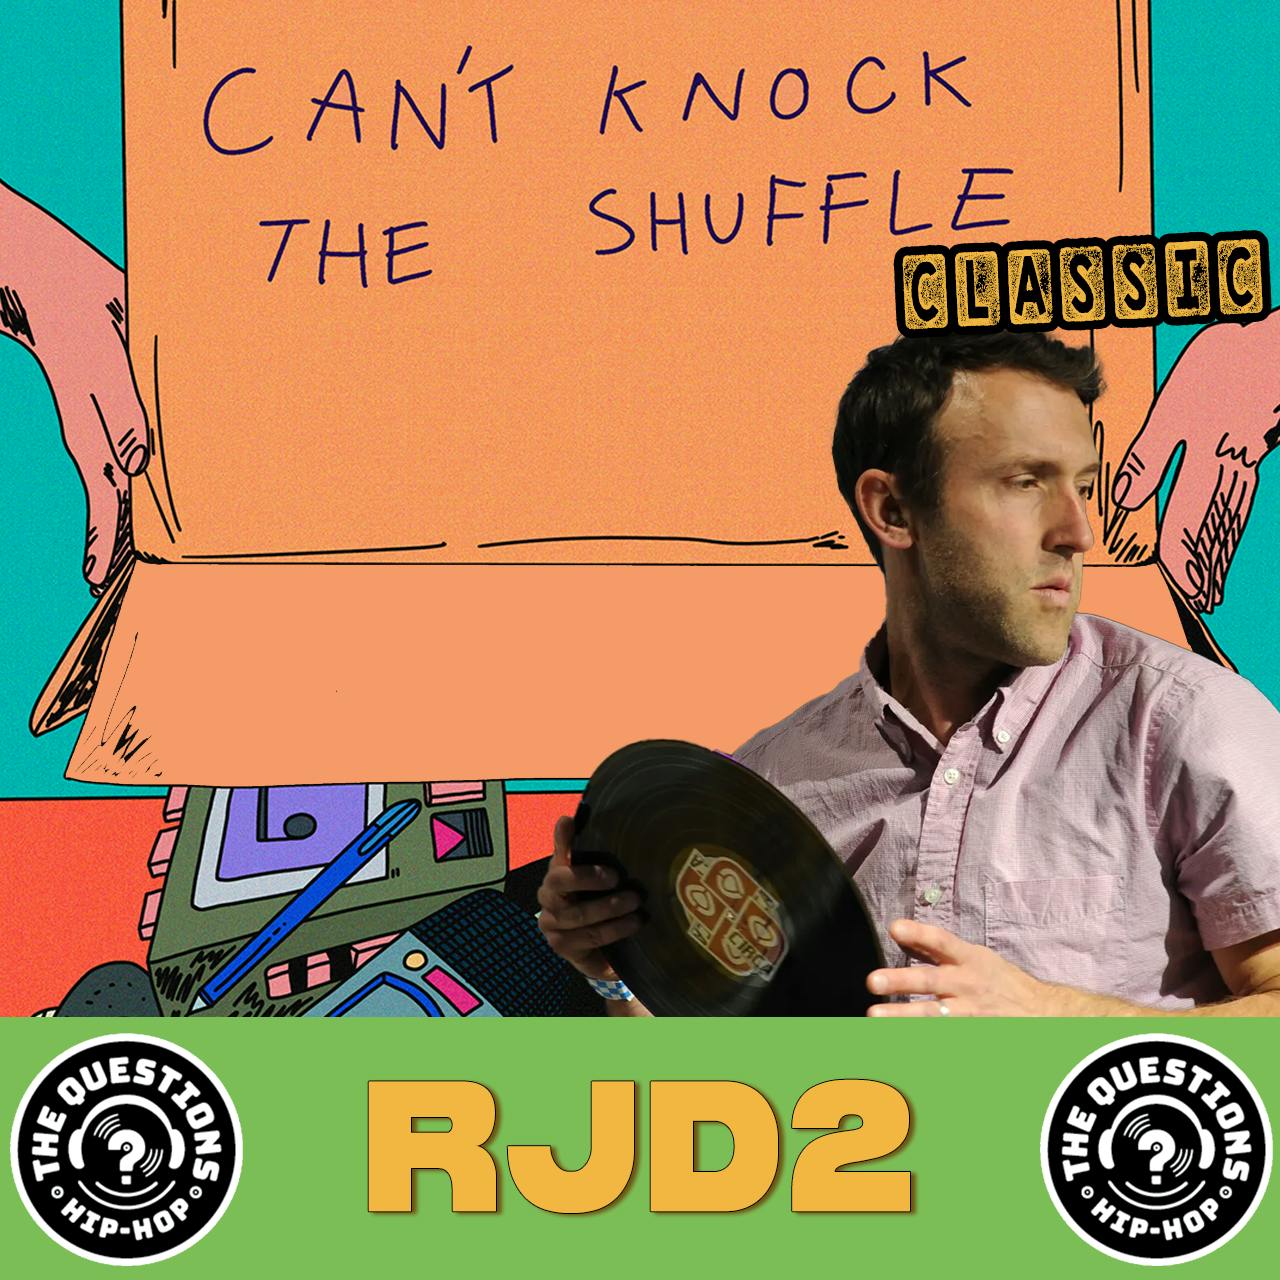 Rjd2 (Can’t Knock the Shuffle Classic)